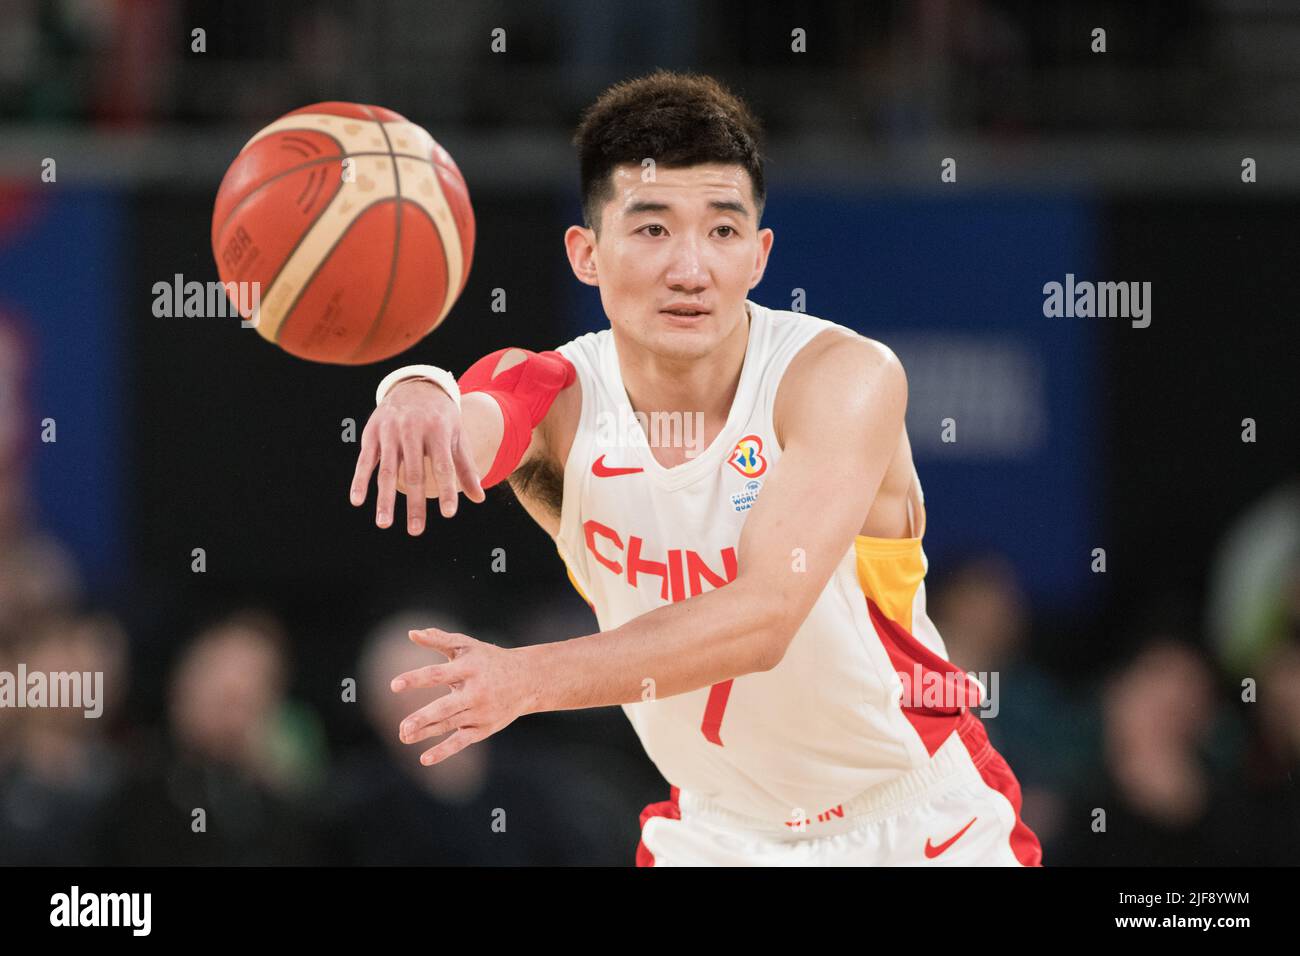 Minghui Sun of China Basketball team seen in action during the Window 3 of  the FIBA Basketball World Cup 2023 Qualifiers held at the John Cain Arena.  Final Score Australia 76:69 China. (